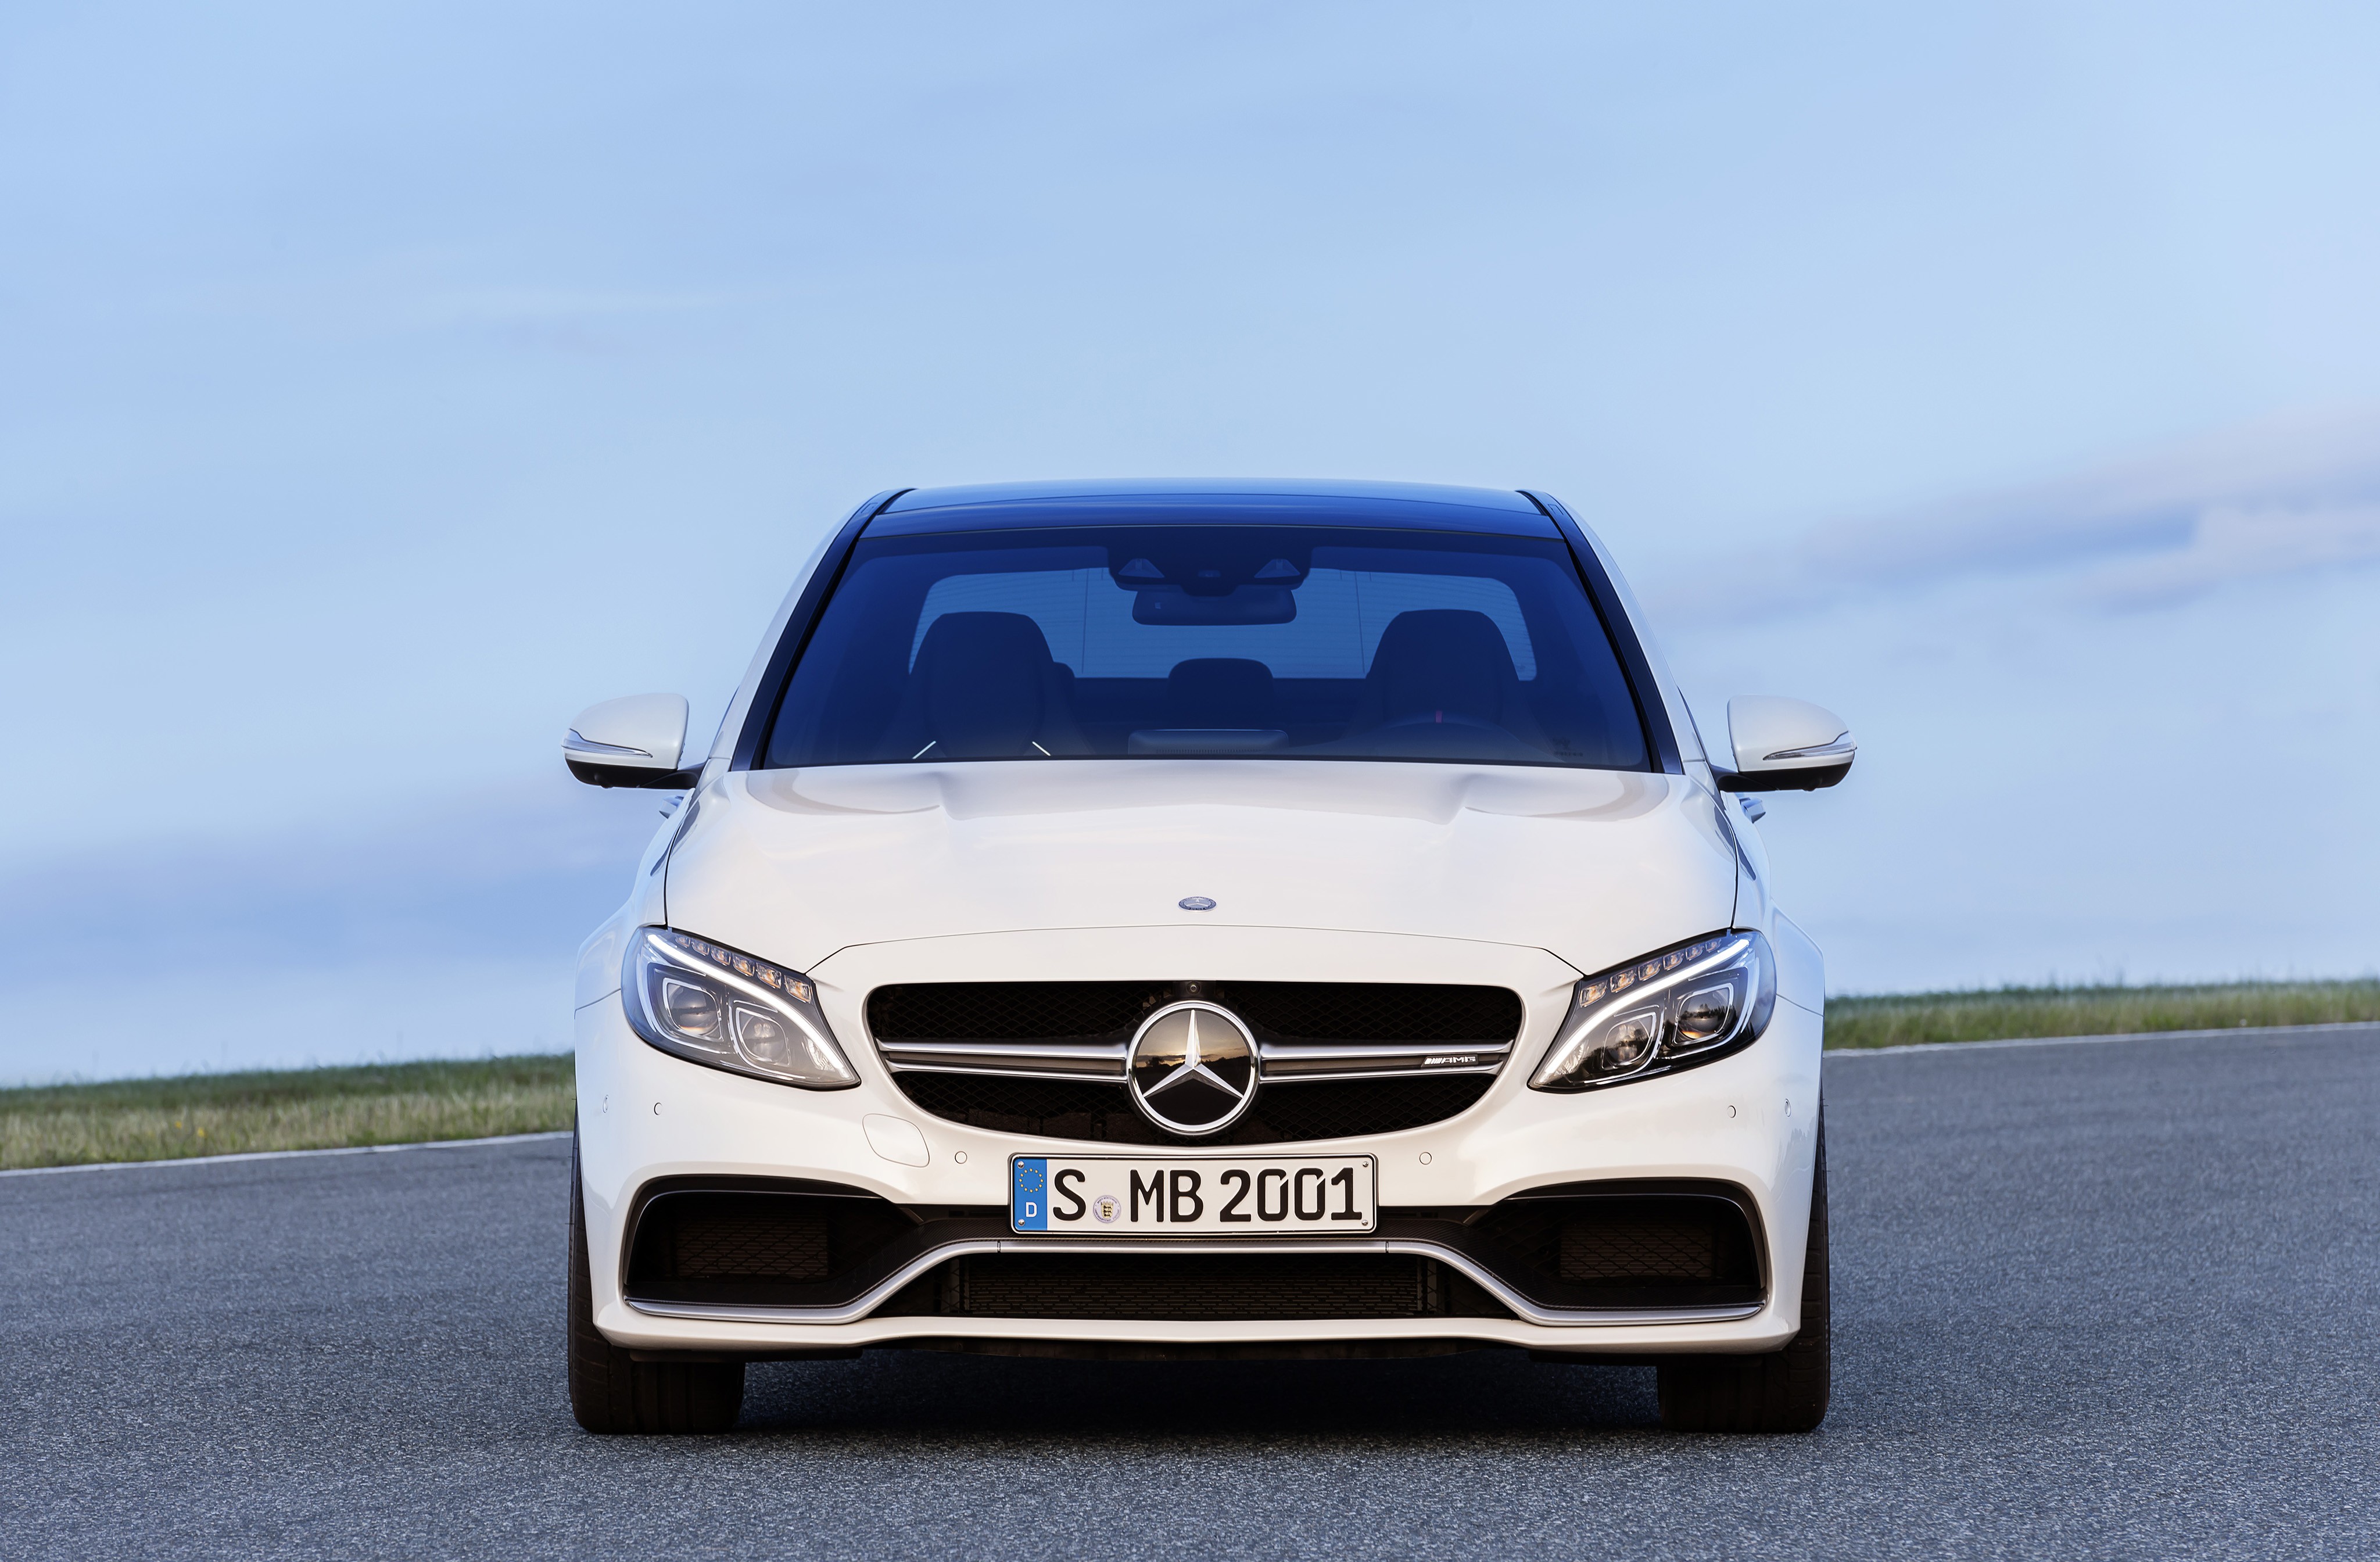 Mercedes C-Class (W205) hd specifications